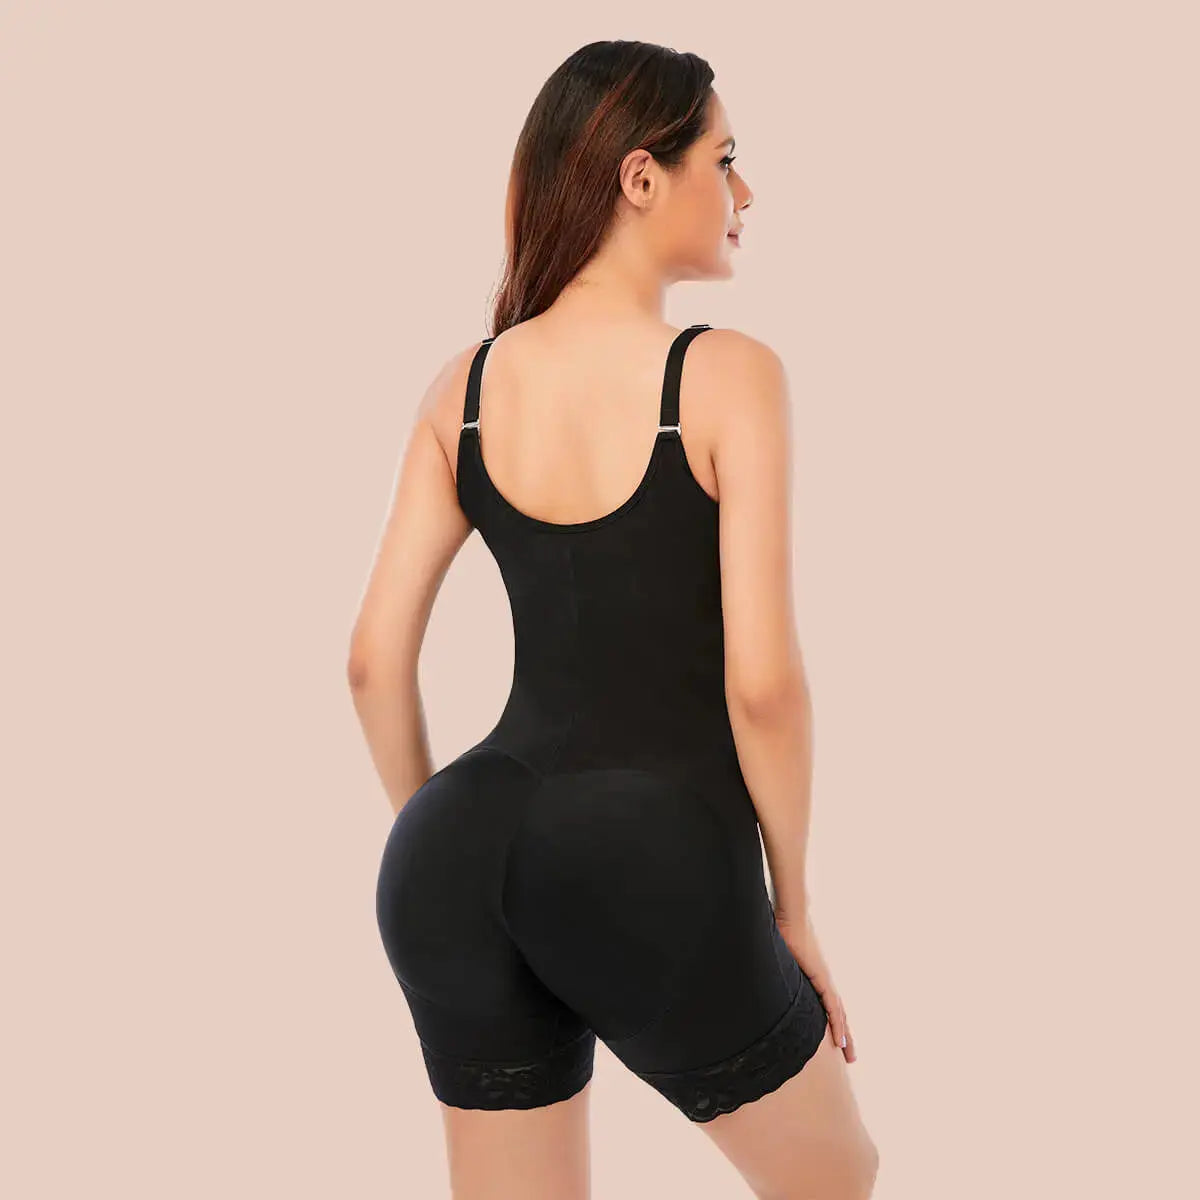 Colombian Womens Full Body Plus Size Corset Shapewear Shapewear For Tummy  Control, Slimming, And Seamless Girdle Plus Size Available 220125 From  Jia0007, $28.26